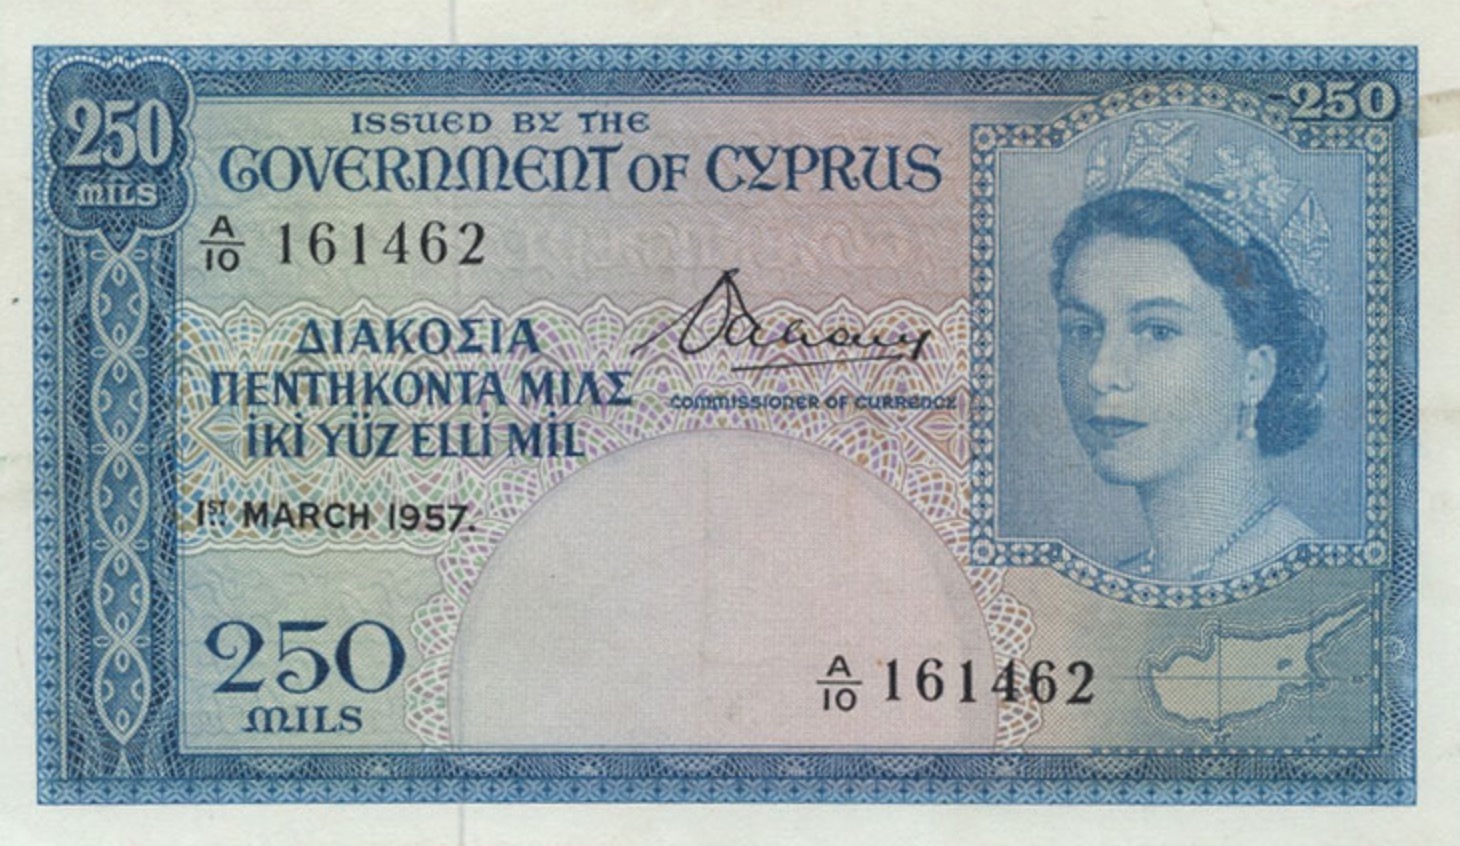 250 Mils banknote (Government of Cyprus)